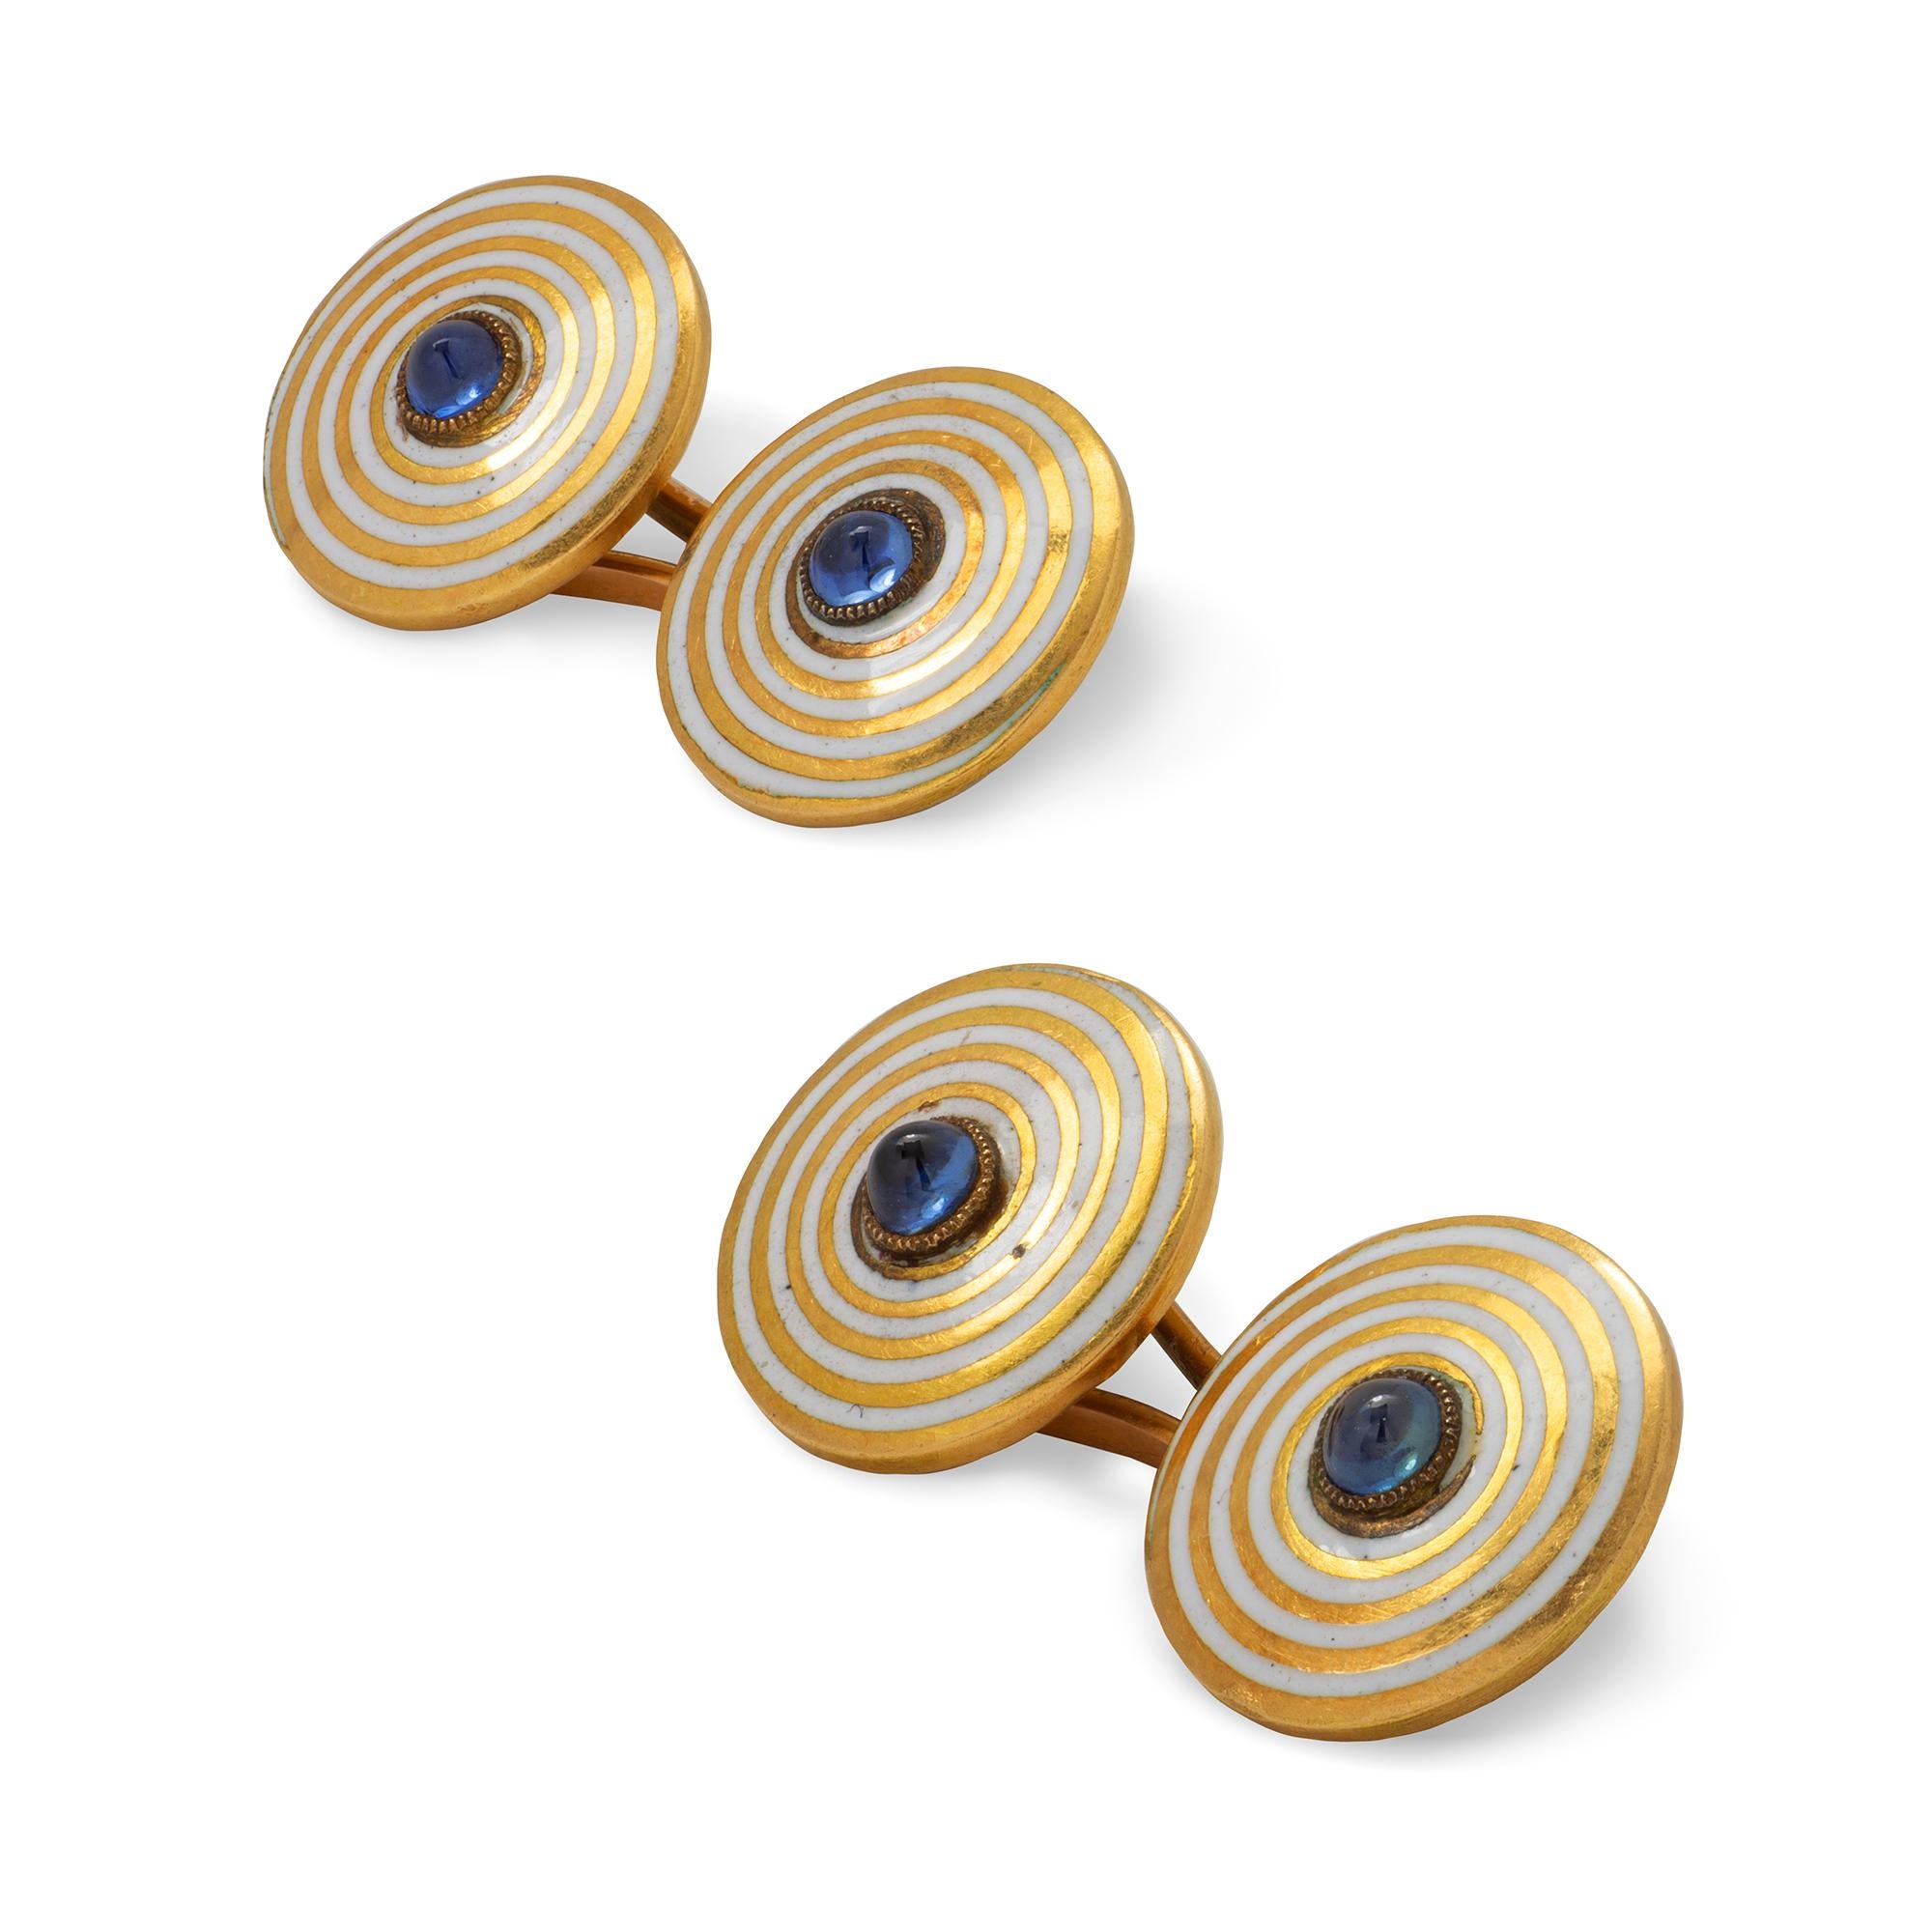 A pair of Art-Deco enamel and sapphire cufflinks, each link consisted of two round plaques with white enamelled spiral decoration, centrally-set with a cabochon sapphire, all in yellow gold mount with detachable figure-of-eight gold fitting, circa